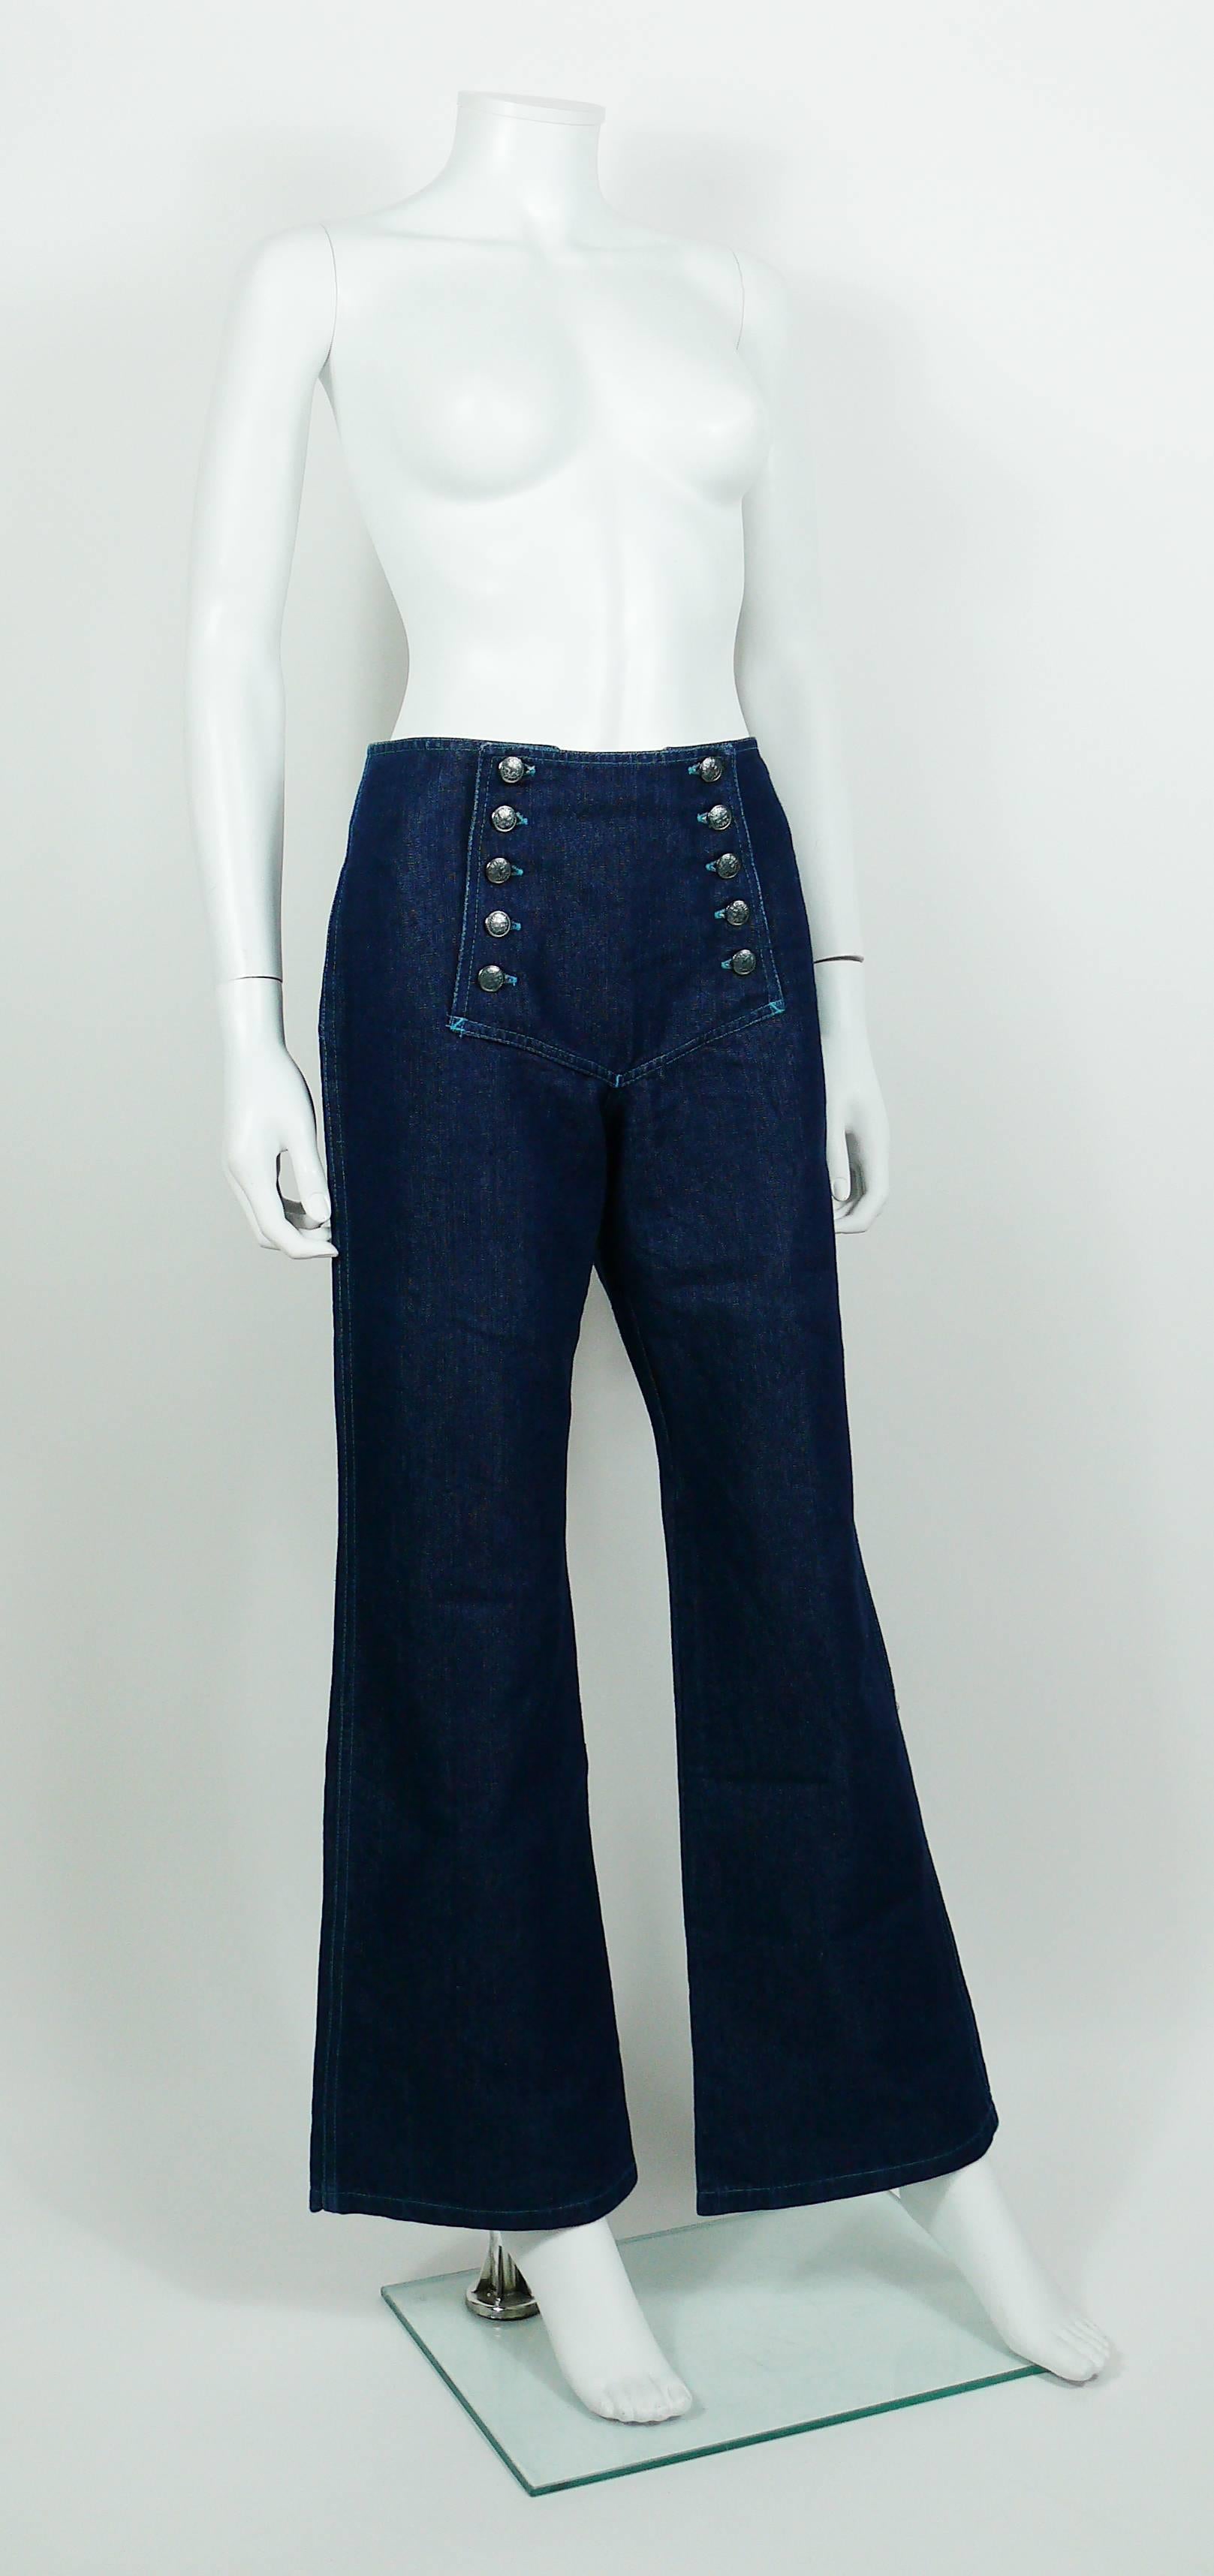 JEAN PAUL GAULTIER vintage iconic sailor blue jeans featuring logo button fastening apron to the front.

Label reads GAULTIER JEAN'S Haute Jeanerie Tailored.
Made in Morocco.

Size tag reads : 38.
Please refer to measurements.

Composition tags read